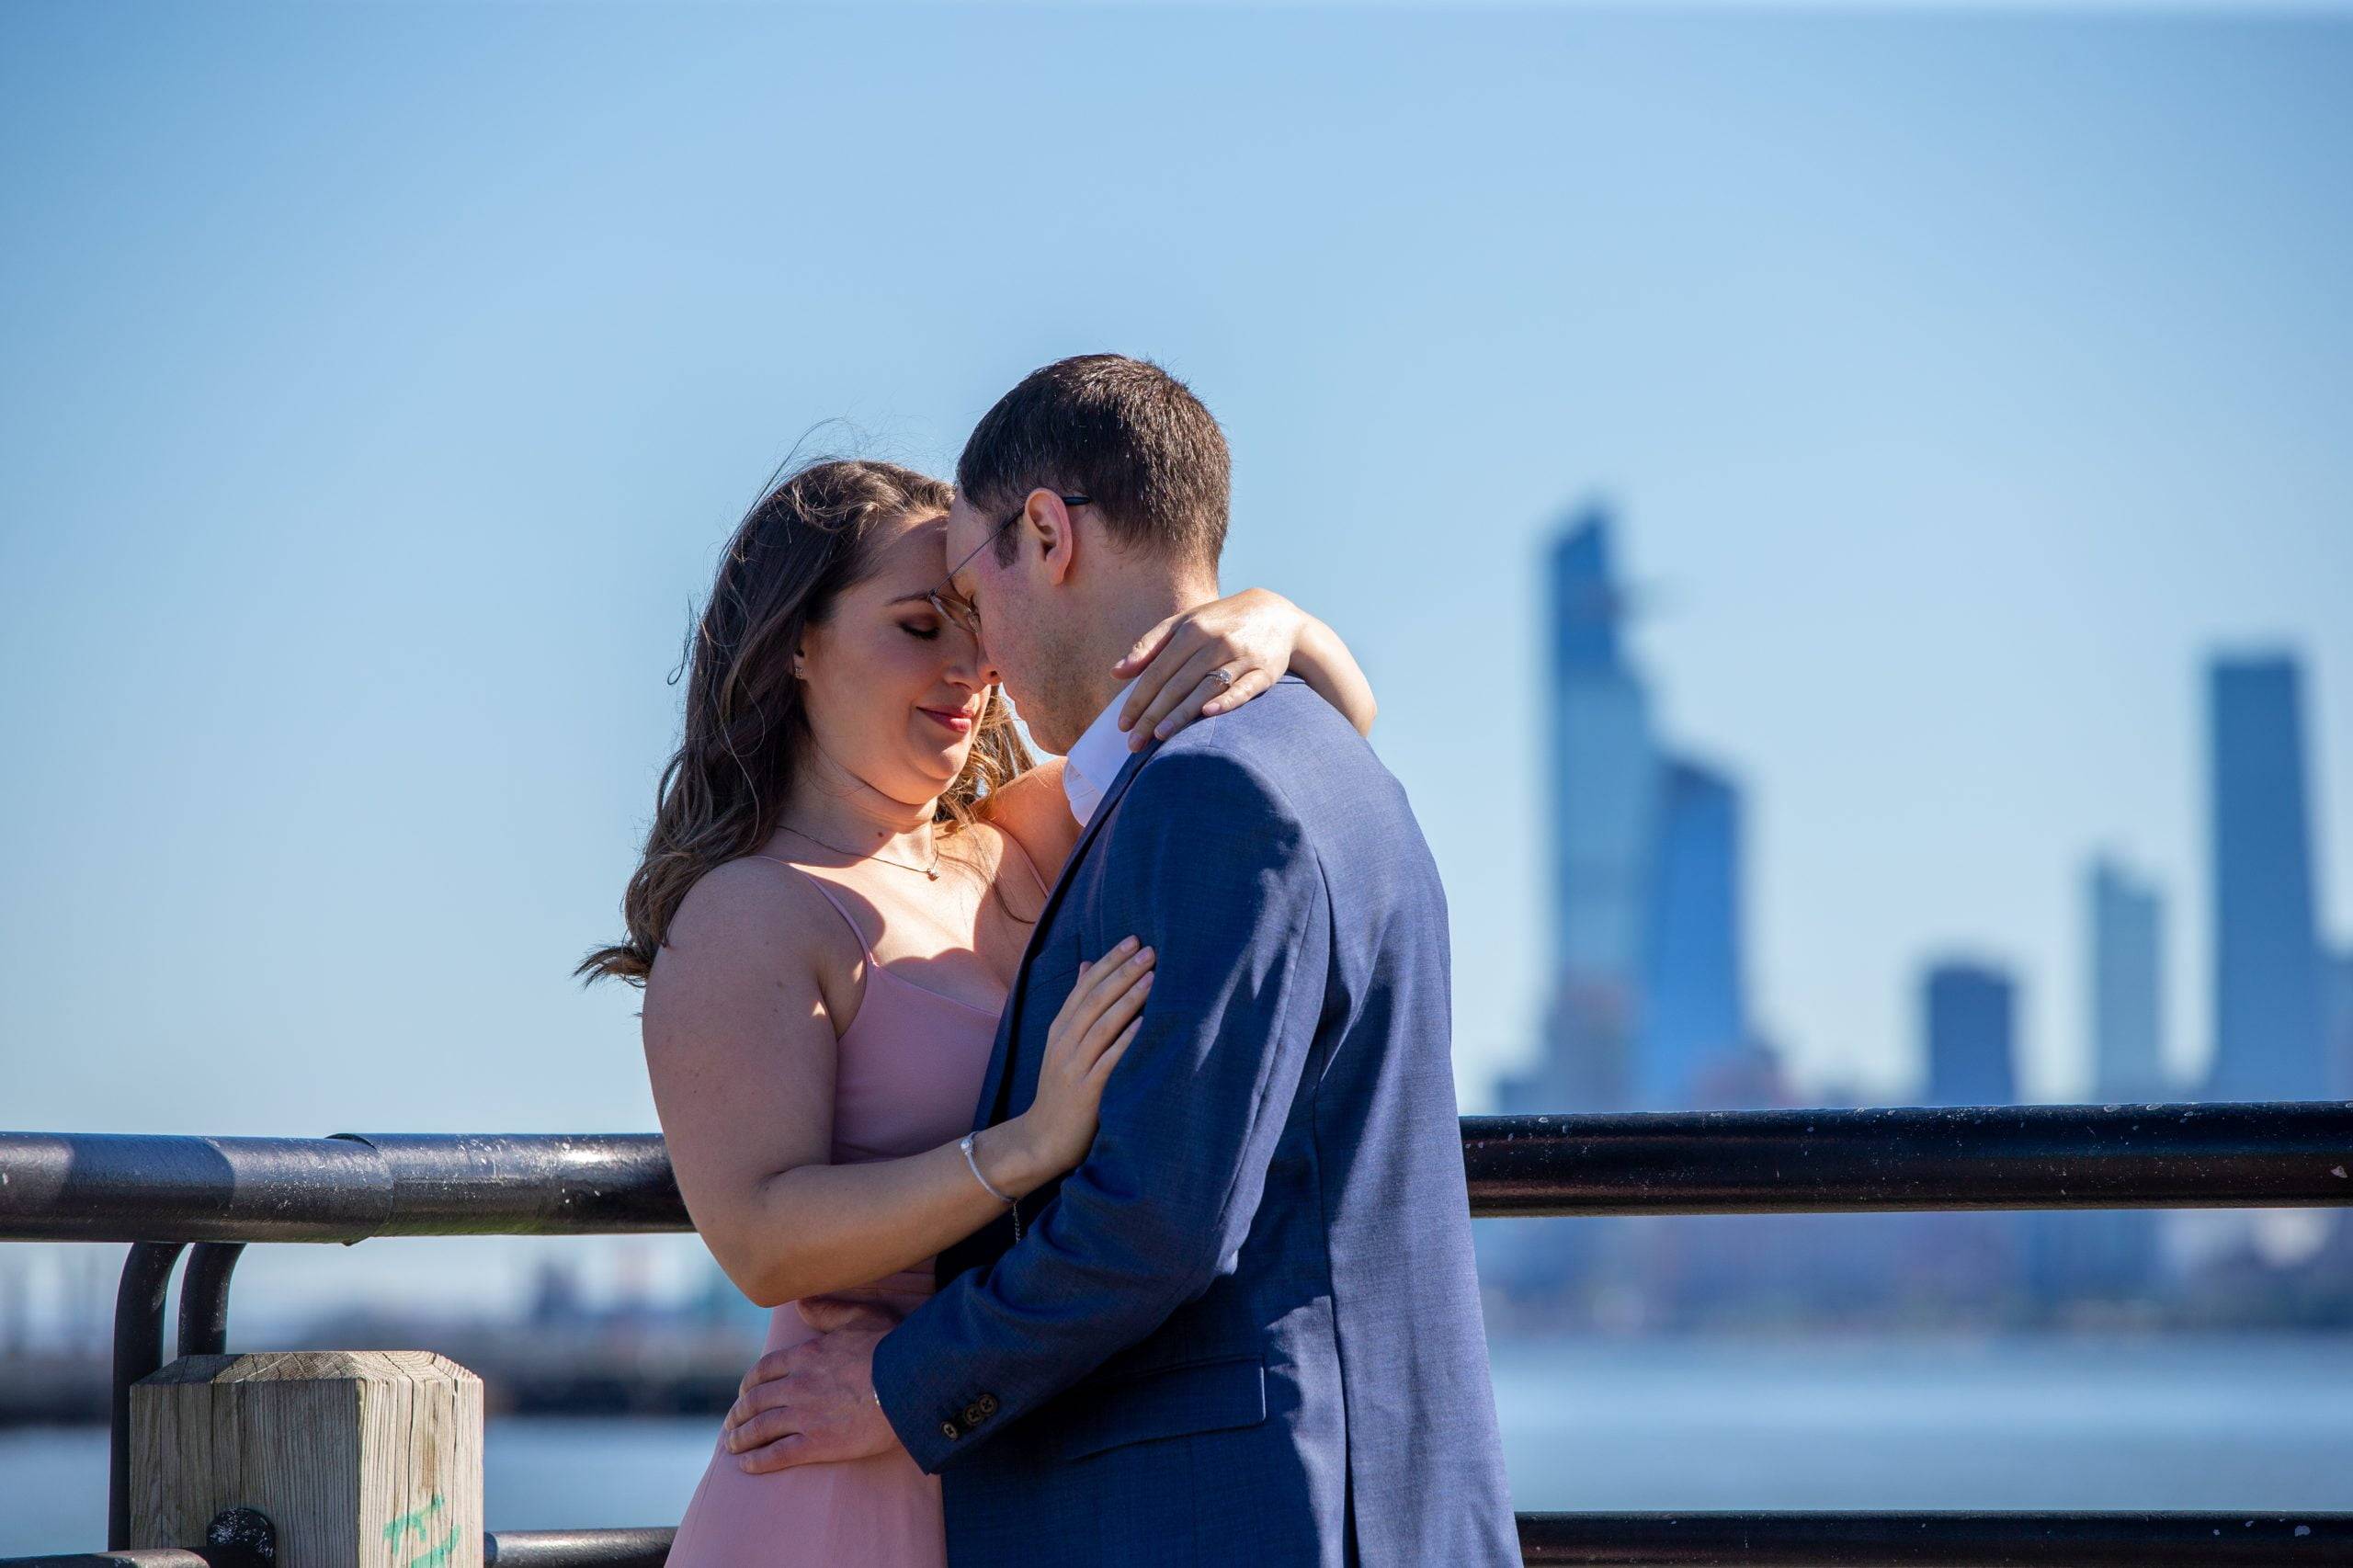 A couple embraces on a pier with the city skyline in the background.